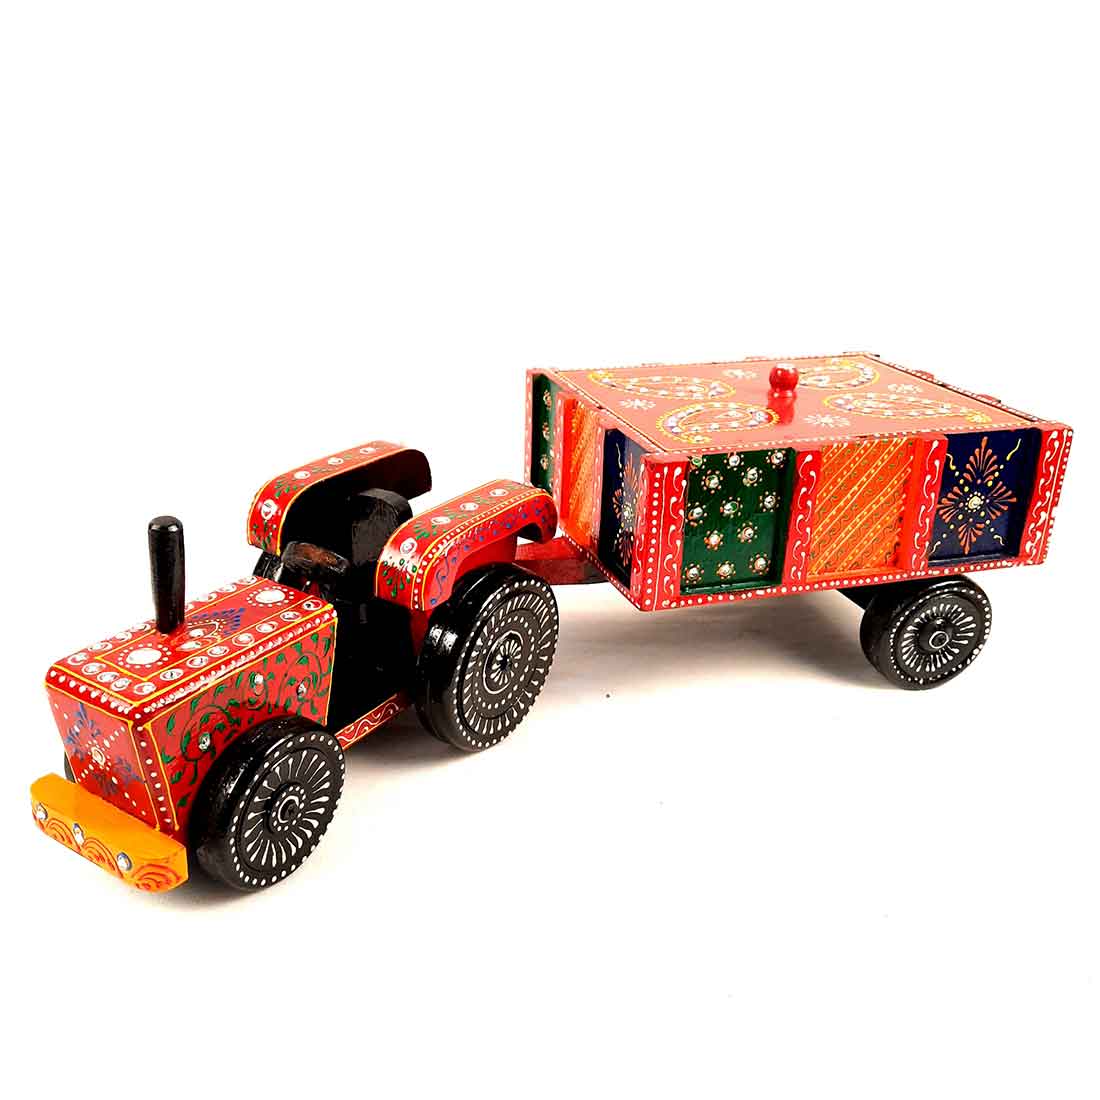 Dry Fruit Box with Lid  - Tractor Design - For Serving & Dining Table Decor - 22 Inch - ApkaMart